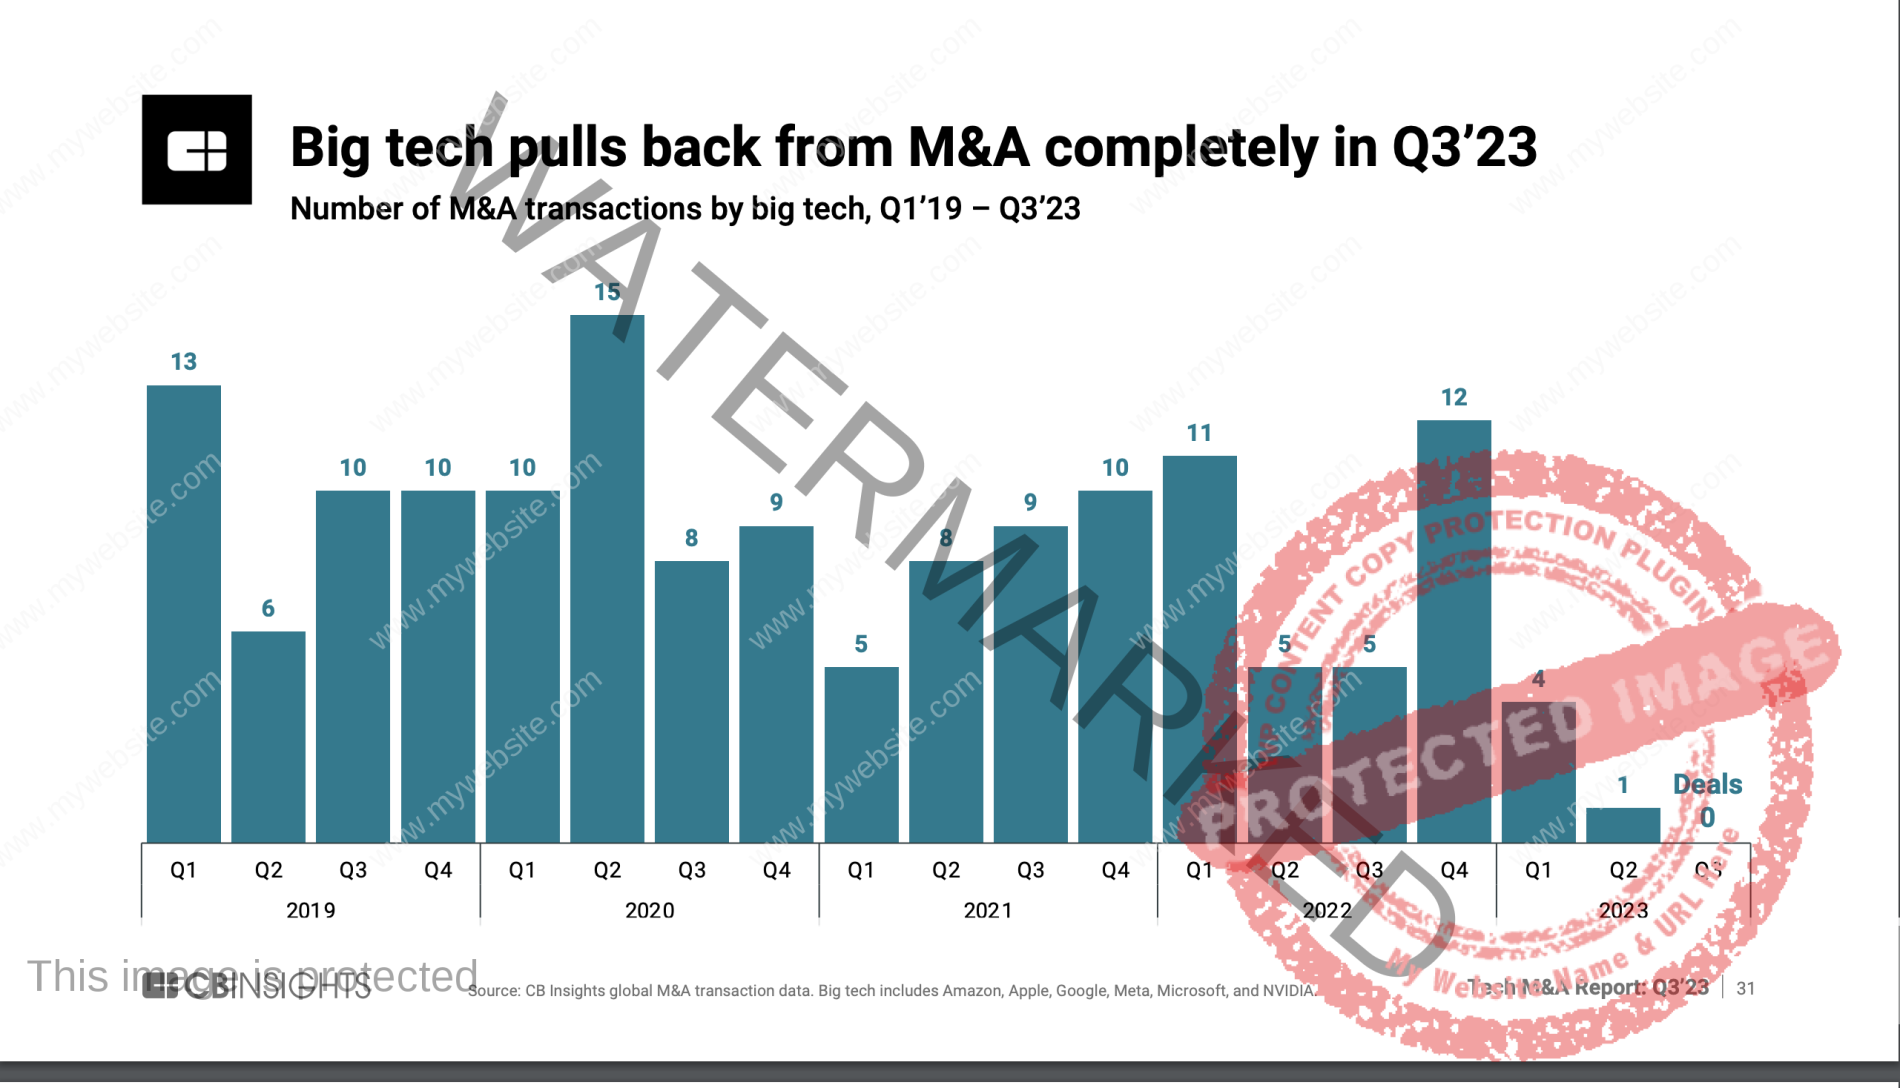 Chart showing number of M&A deals by big tech companies from 2019 until today. In the most recent quarter, Q3 2023, there were zero deals.